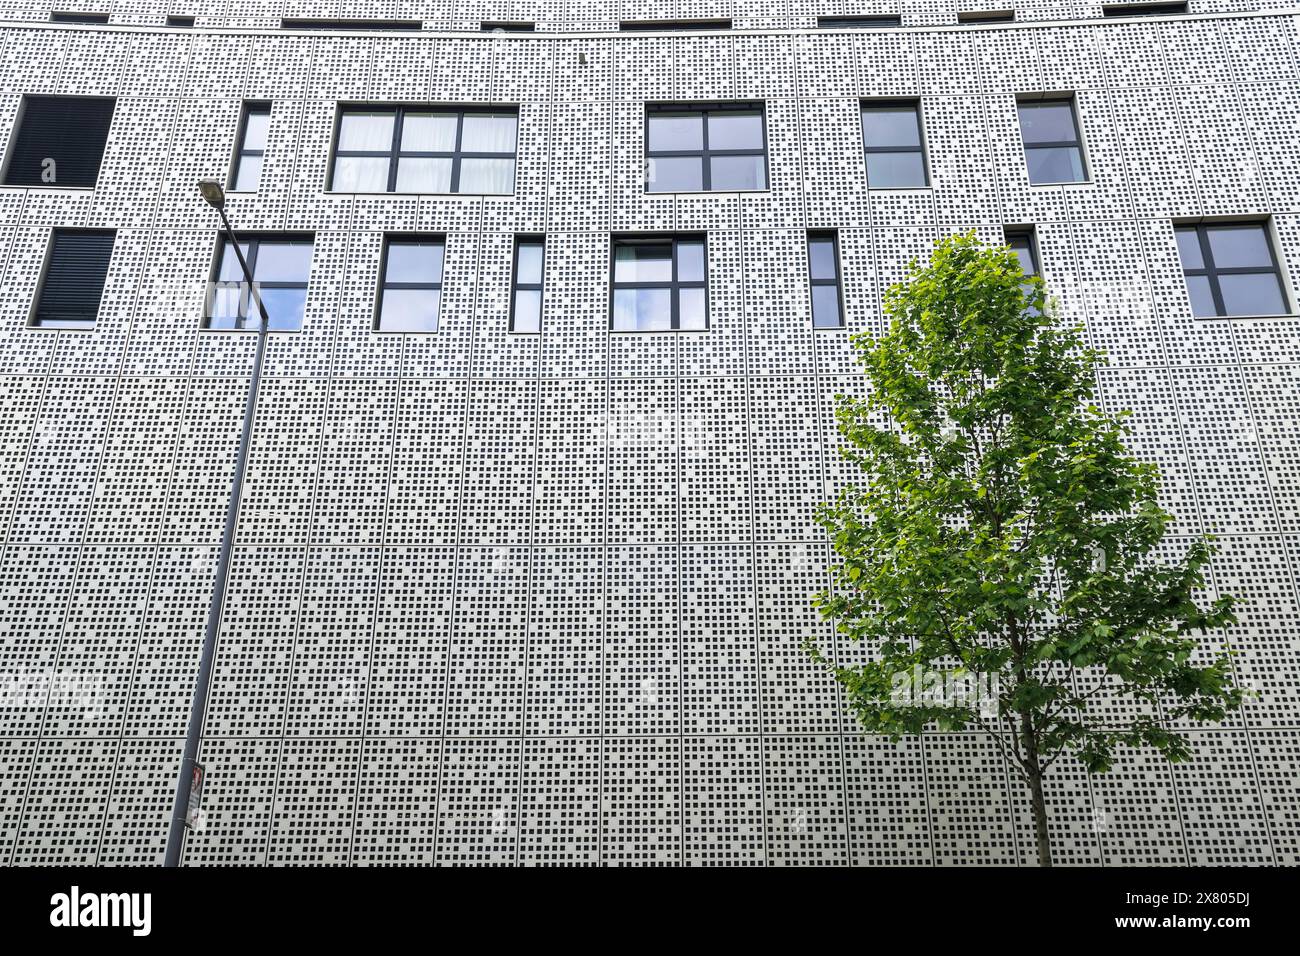 young tree in front of the facade of a multi-story car park at Magnus street, Cologne, Germany. junger Baum vor einer Parhausfassade an der Magnusstra Stock Photo